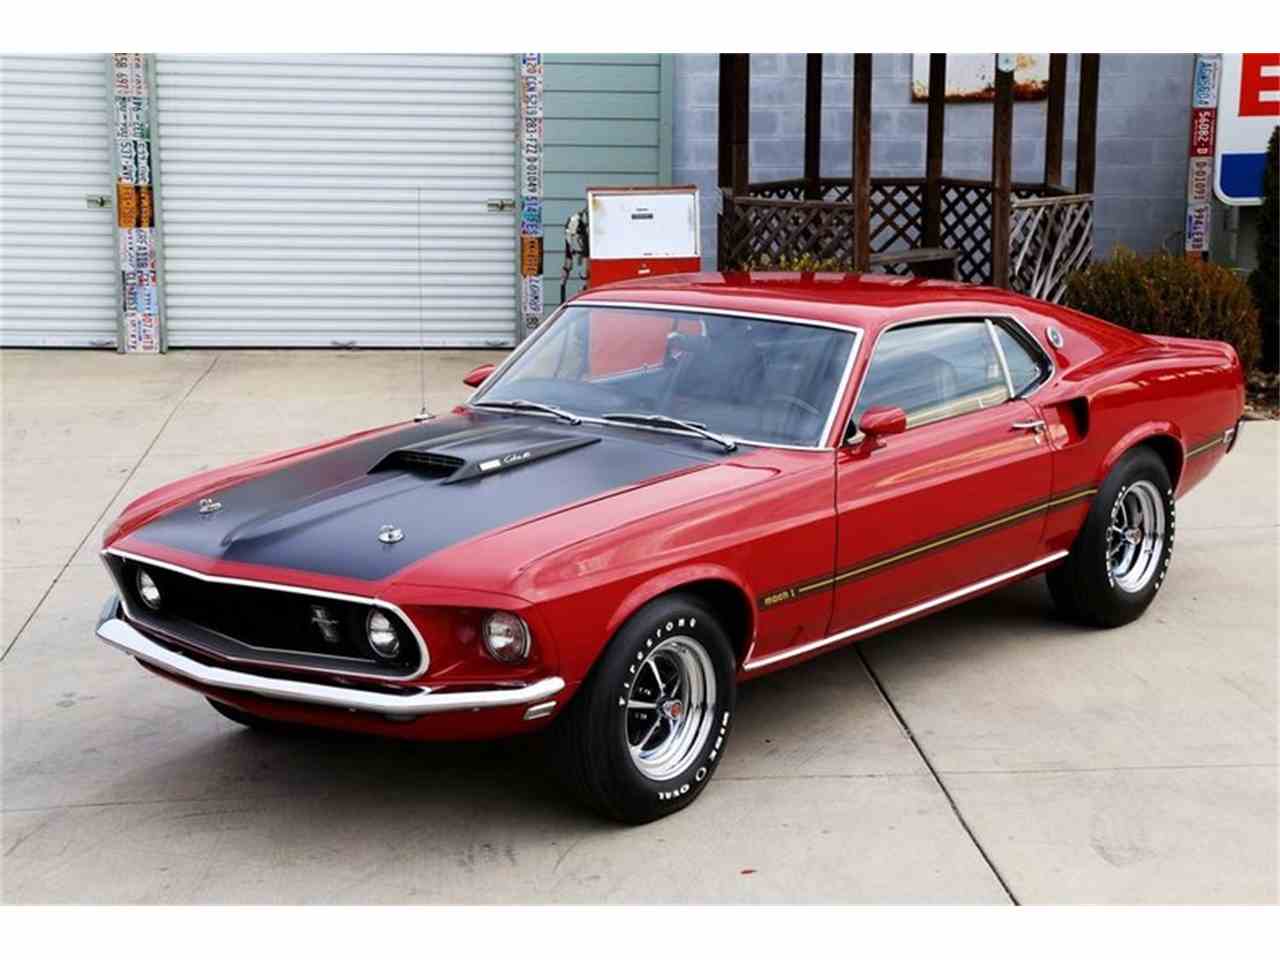 1969 Ford Mustang Mach 1 for Sale | ClassicCars.com | CC-1059450